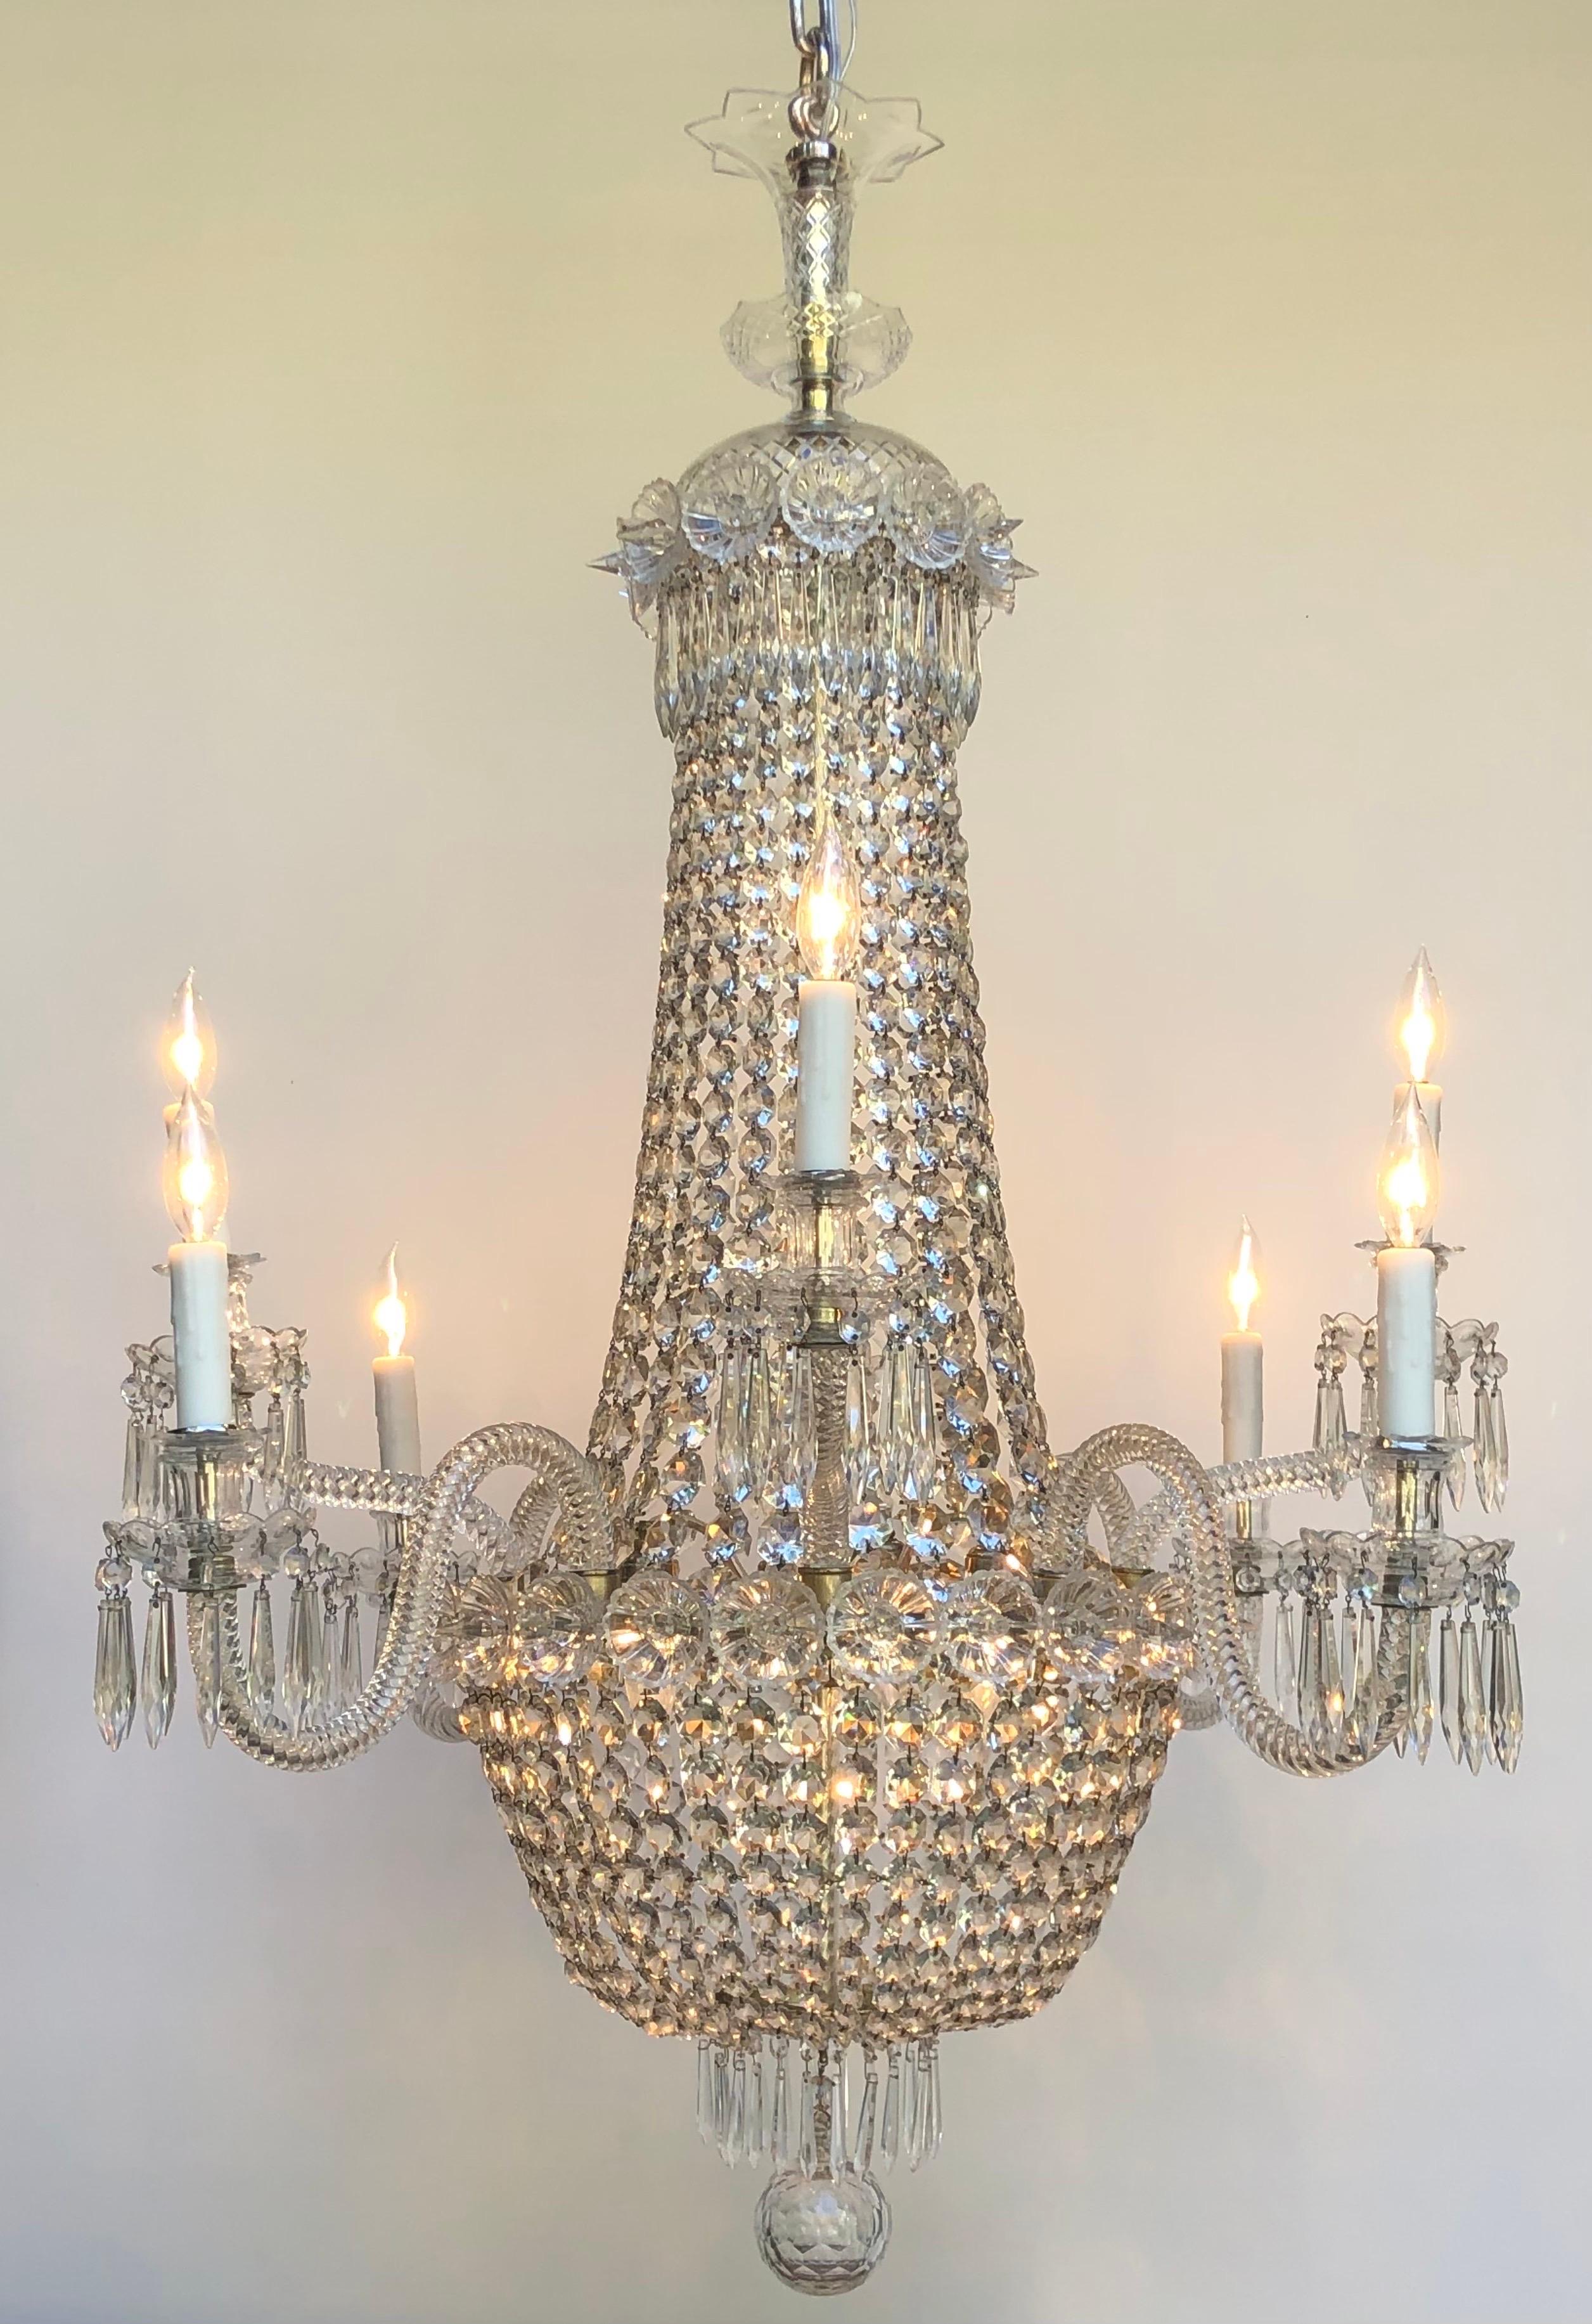 Elegant Silver Plate & Crystal Regency Tent-and-Basket Chandelier / Gasolier with Eight crystal arms, made in England in the mid Nineteenth Century. The Regency Chandelier has a three part hand-cut crystal crown with a fluted vase above the Sliver